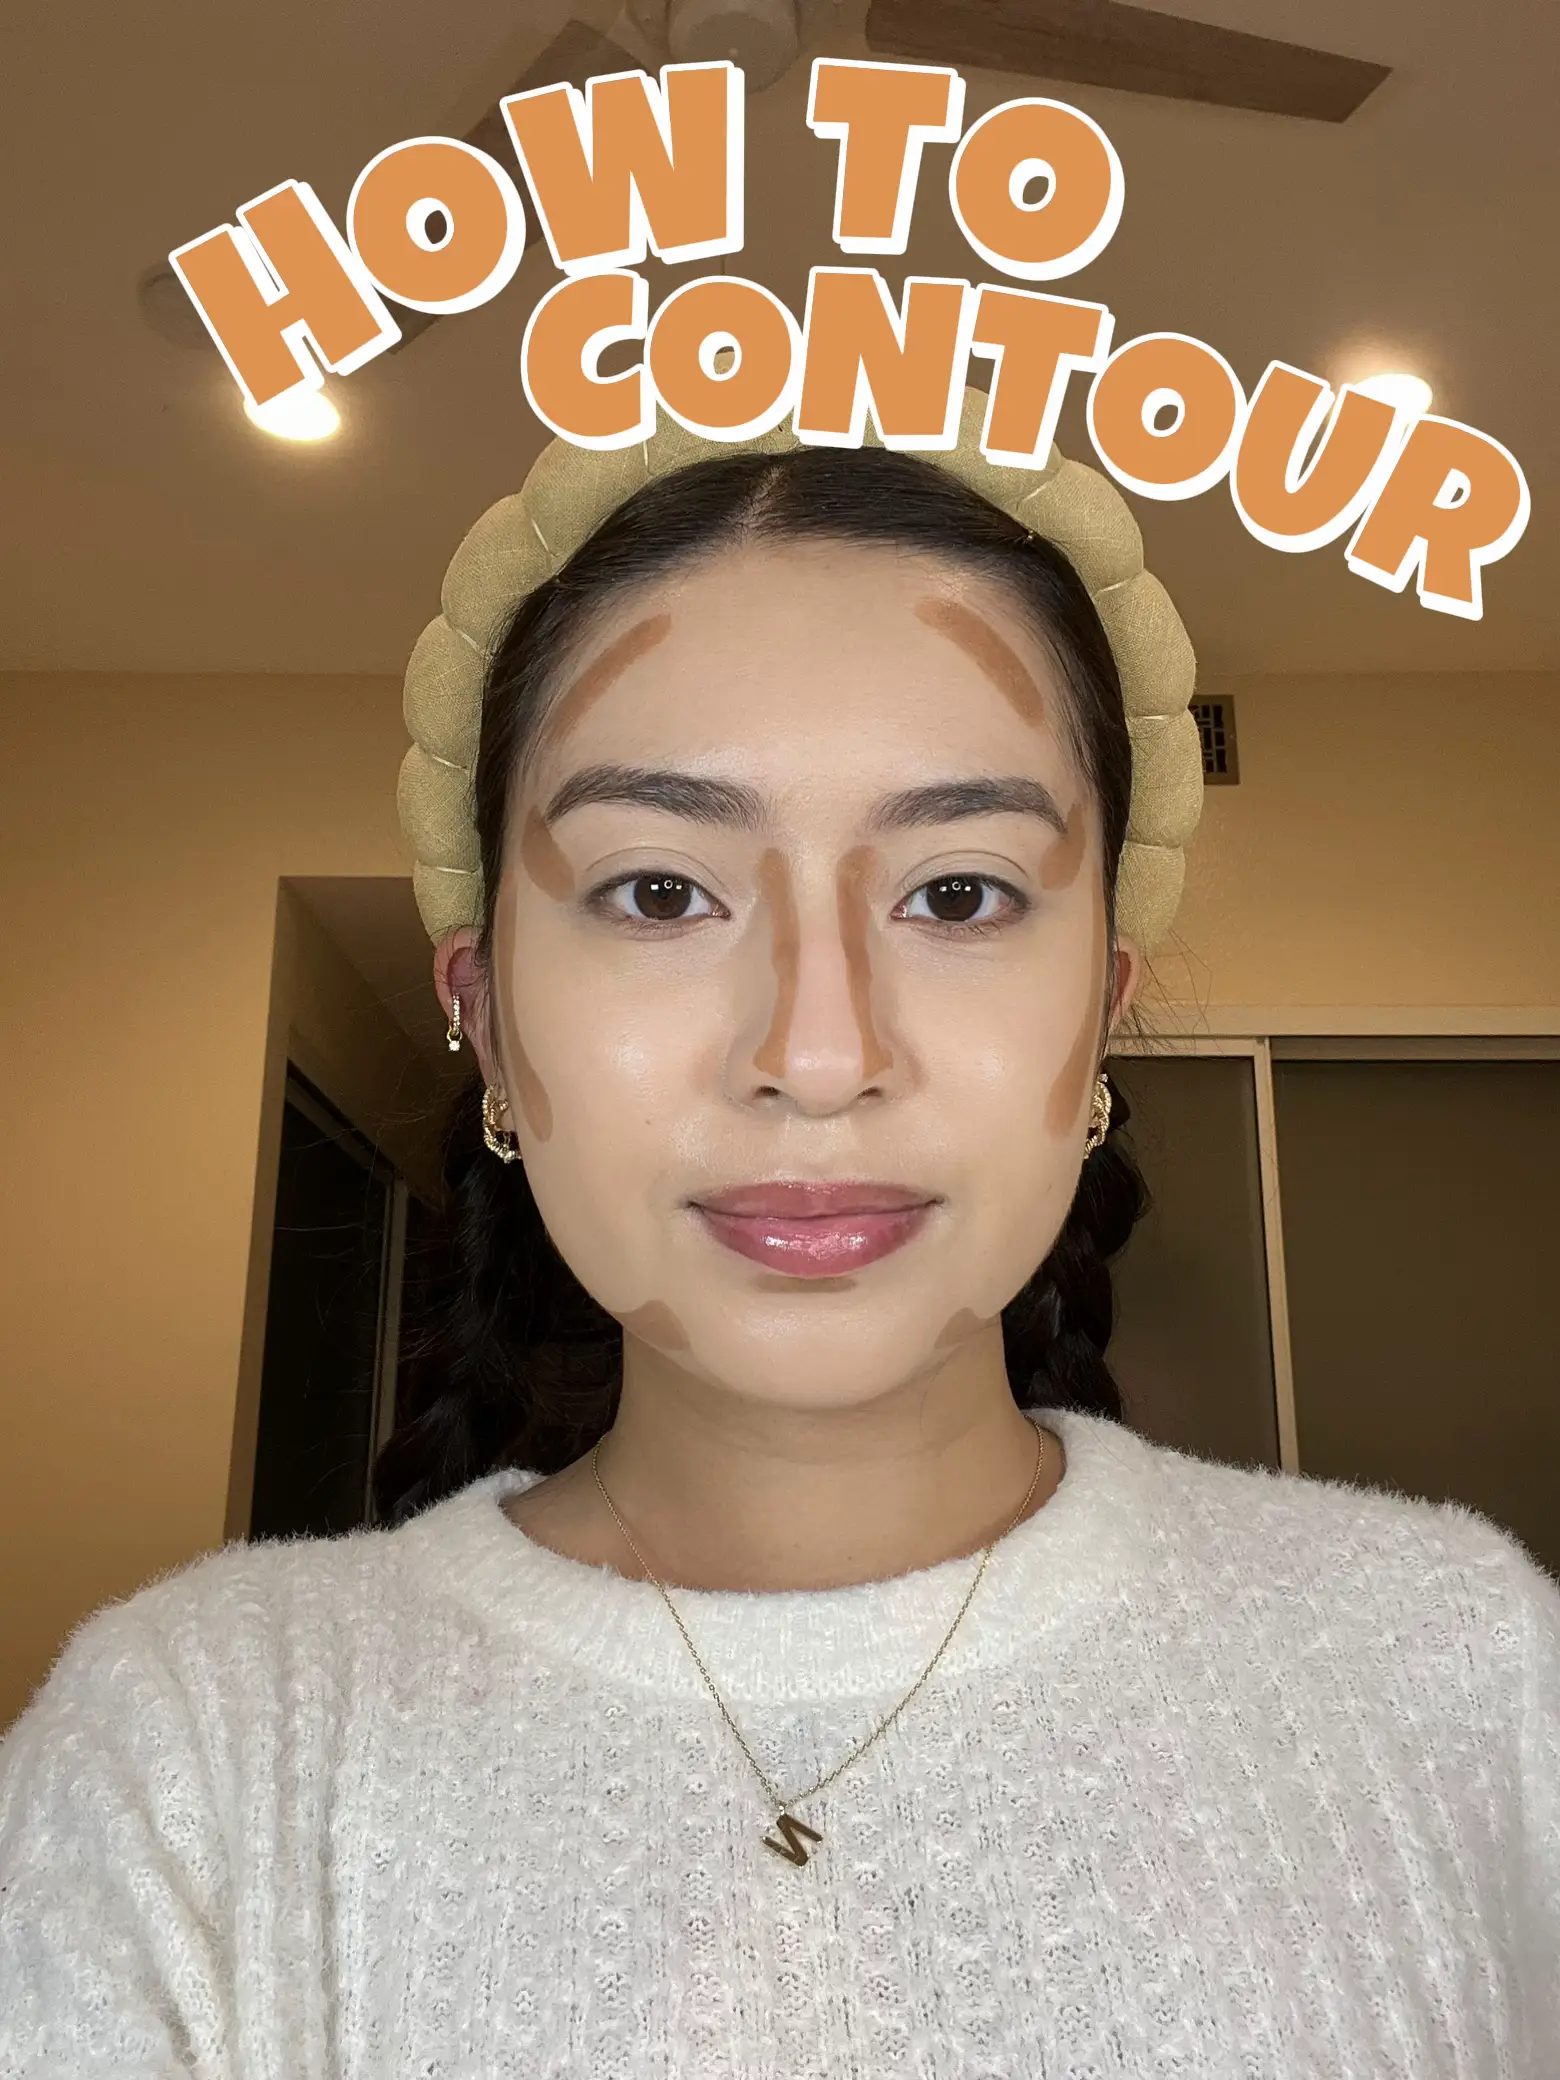 HOW TO: EVERYDAY CONTOUR WITH LAURA MERCIER FLAWLESS CONTOURING